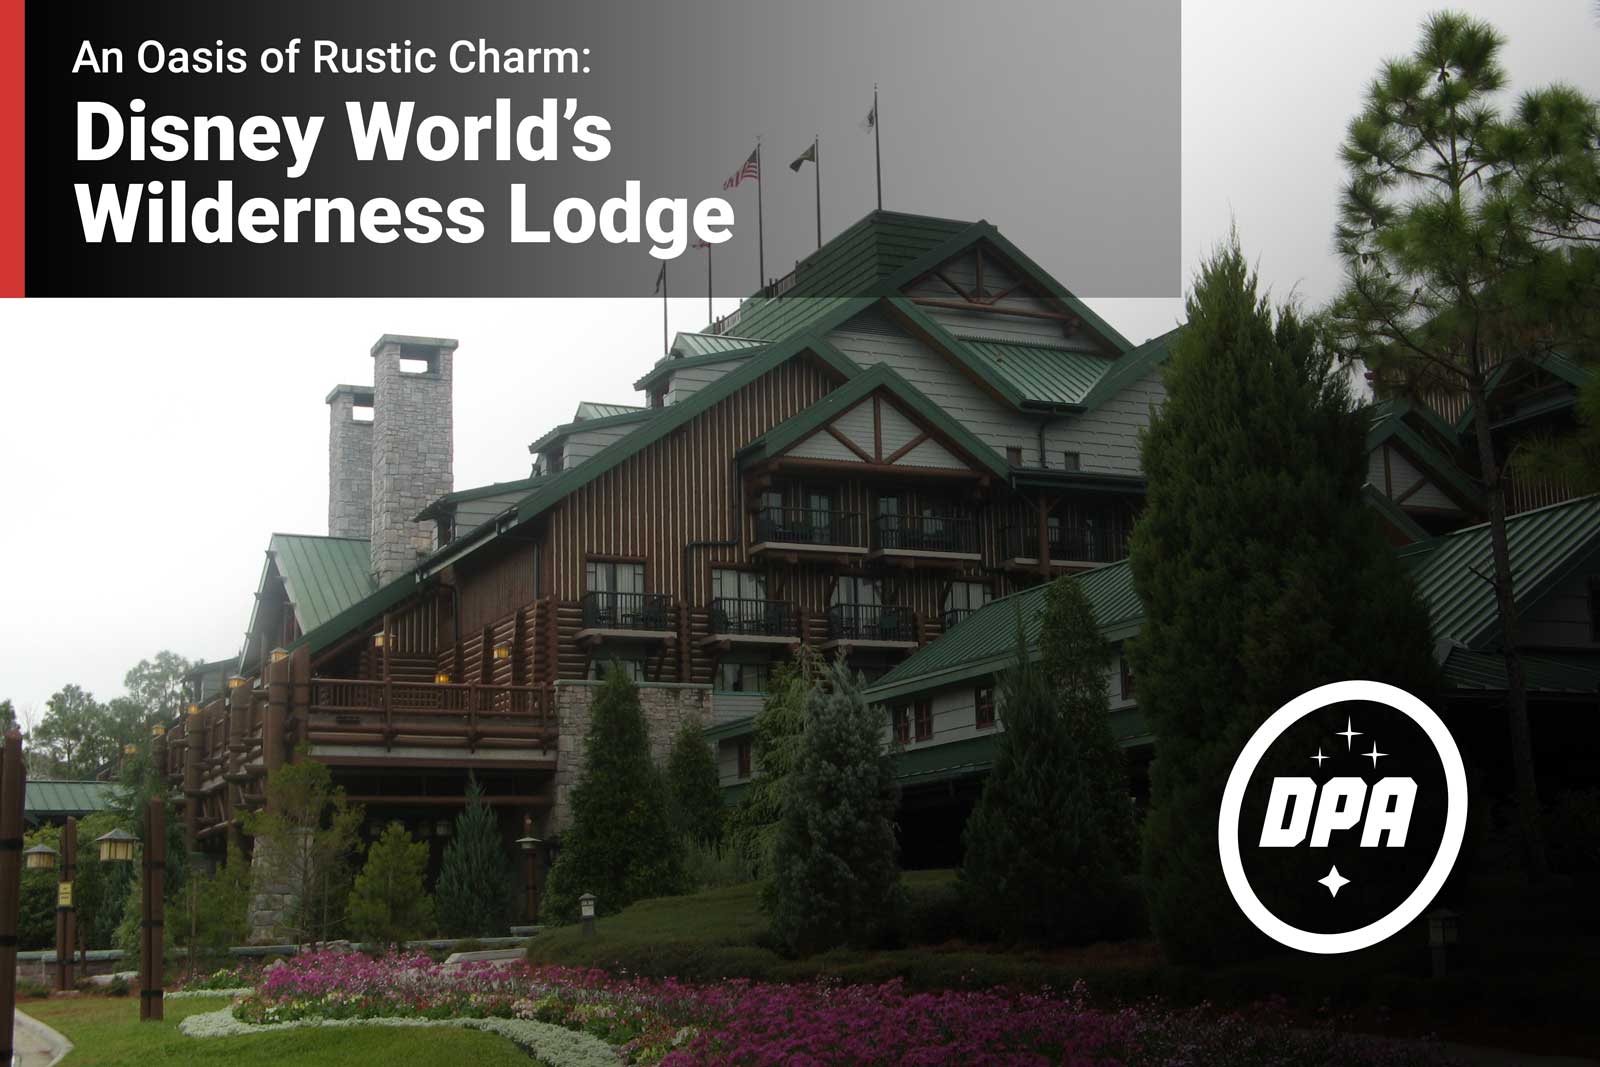 Disney's Wilderness Lodge: An Oasis of Rustic Charm